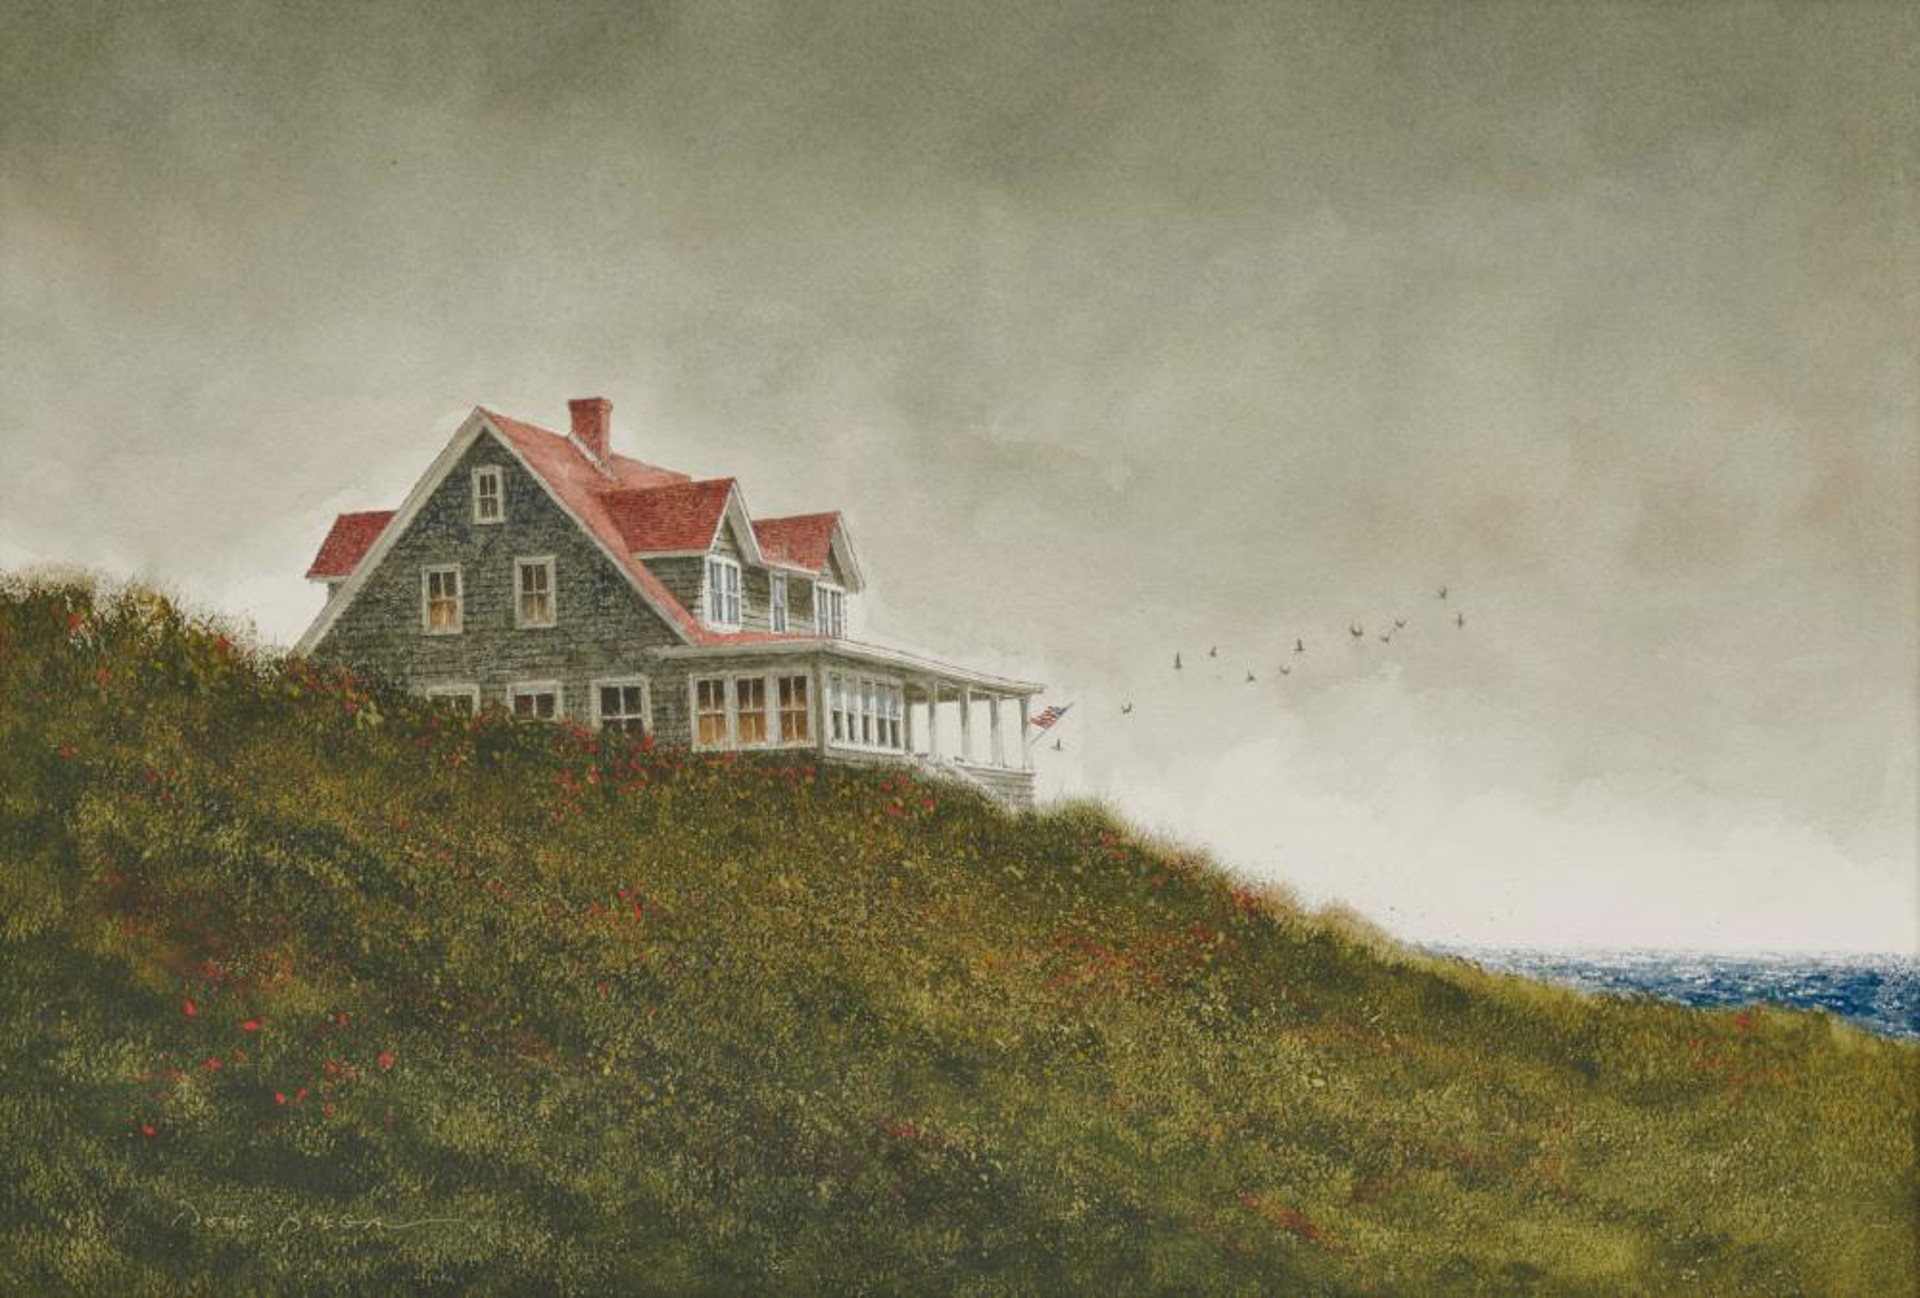 Grey House with Red Roof by Doug Brega